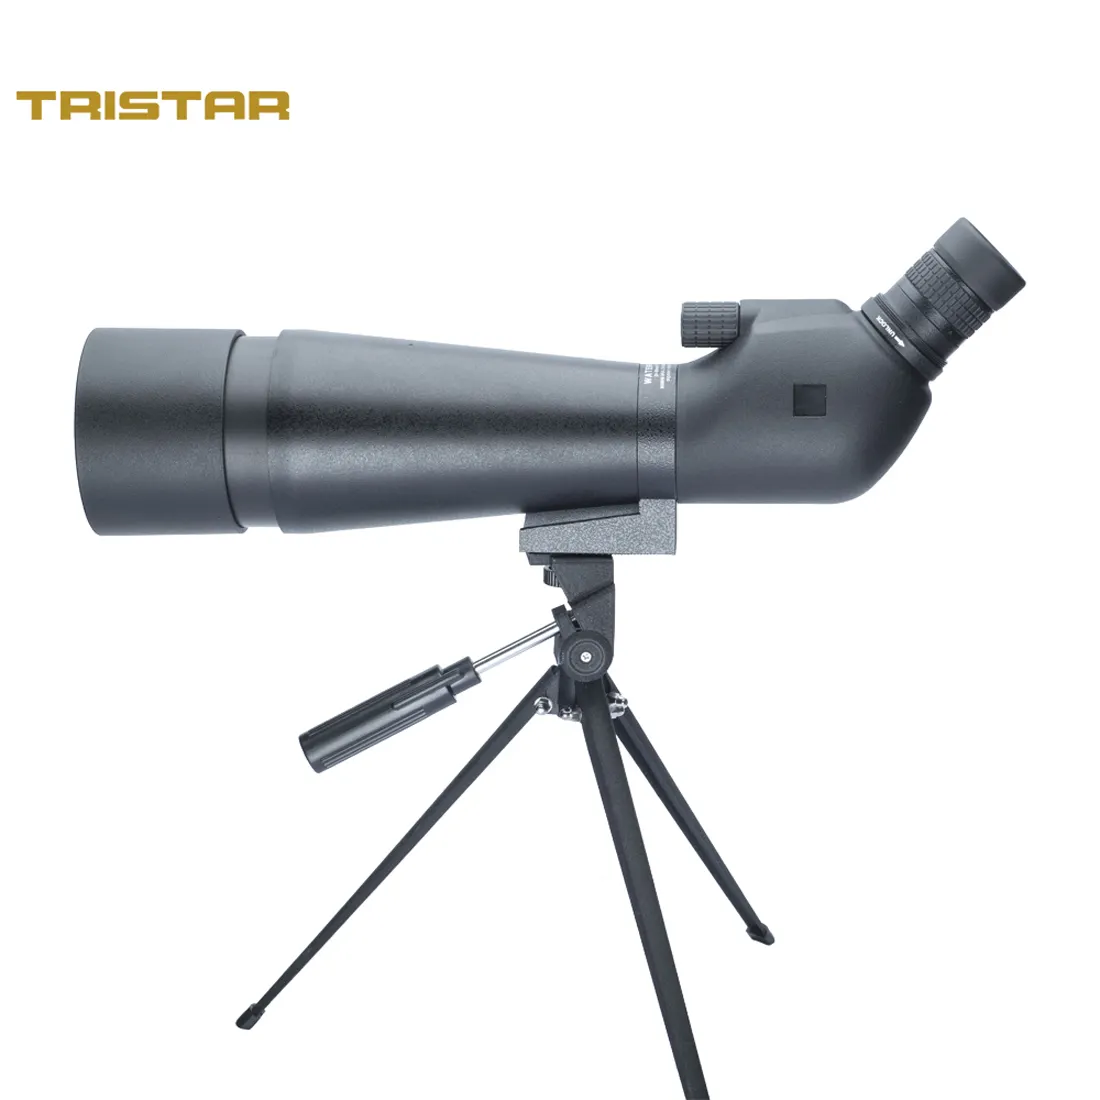 TRISTAR 20-60X60 20-60X80 Waterproof Fog Proof Multi Coated High Definition Spotting Scope for Hunting Bird Watching